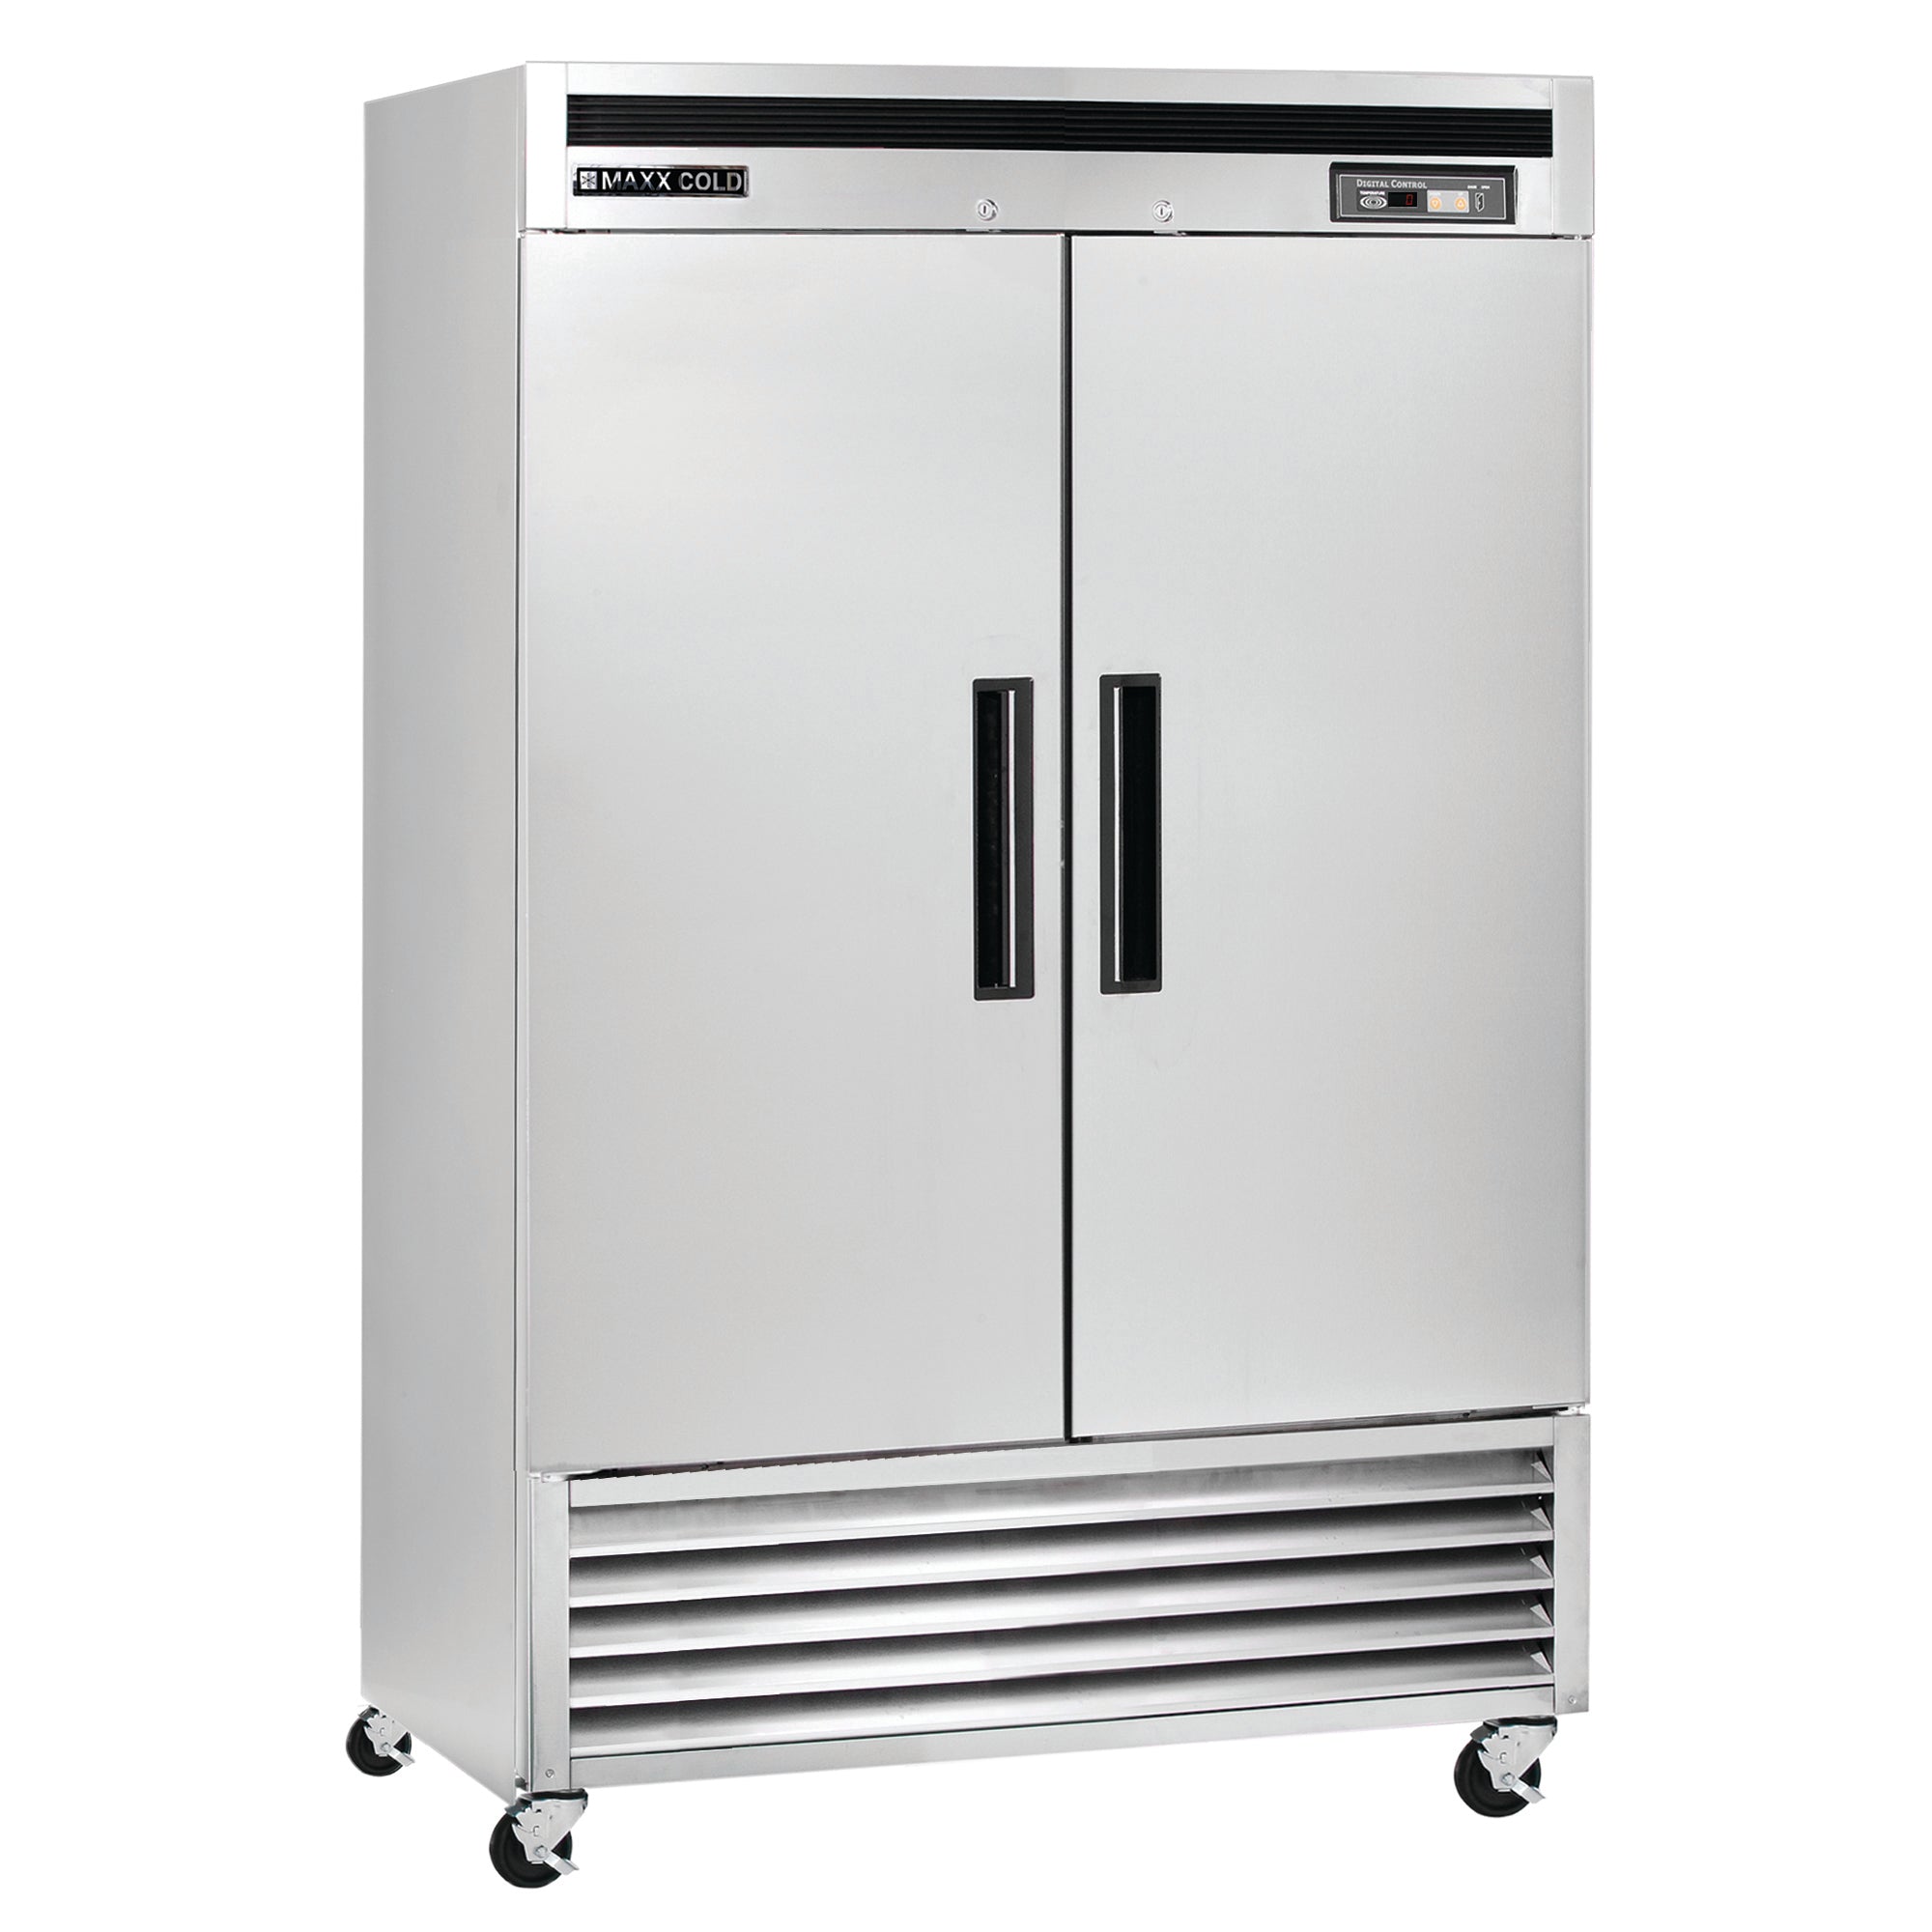 Maxx Cold - MCF-49FDHC, Maxx Cold Double Door Reach-In Freezer, Bottom Mount, 54"W, 49 cu. ft. Storage Capacity, Energy Star Rated, in Stainless Steel